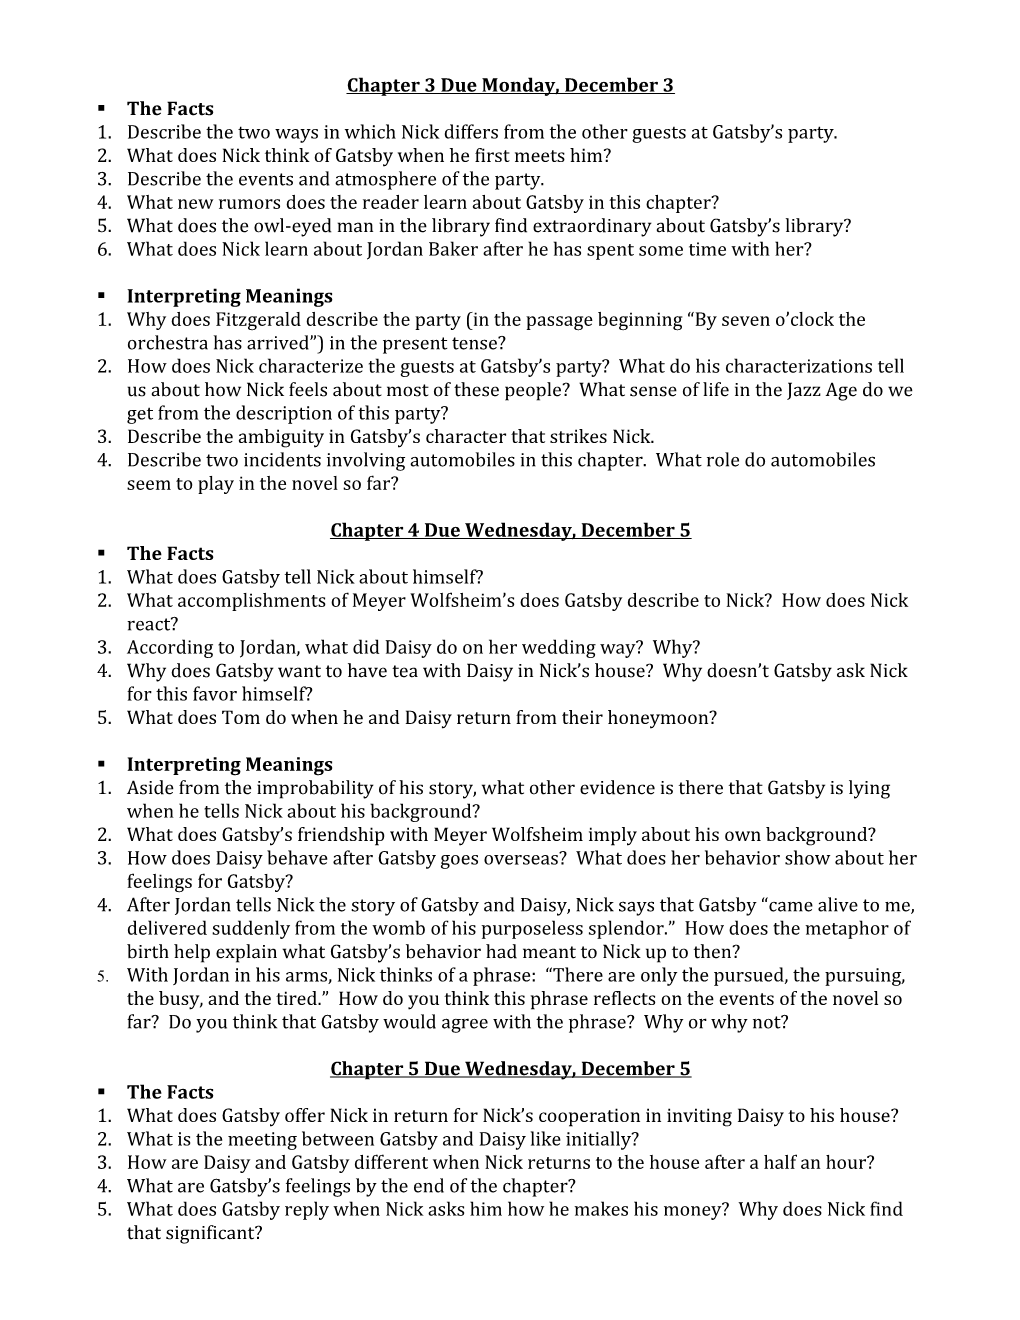 The Great Gatsby Study Questions AP